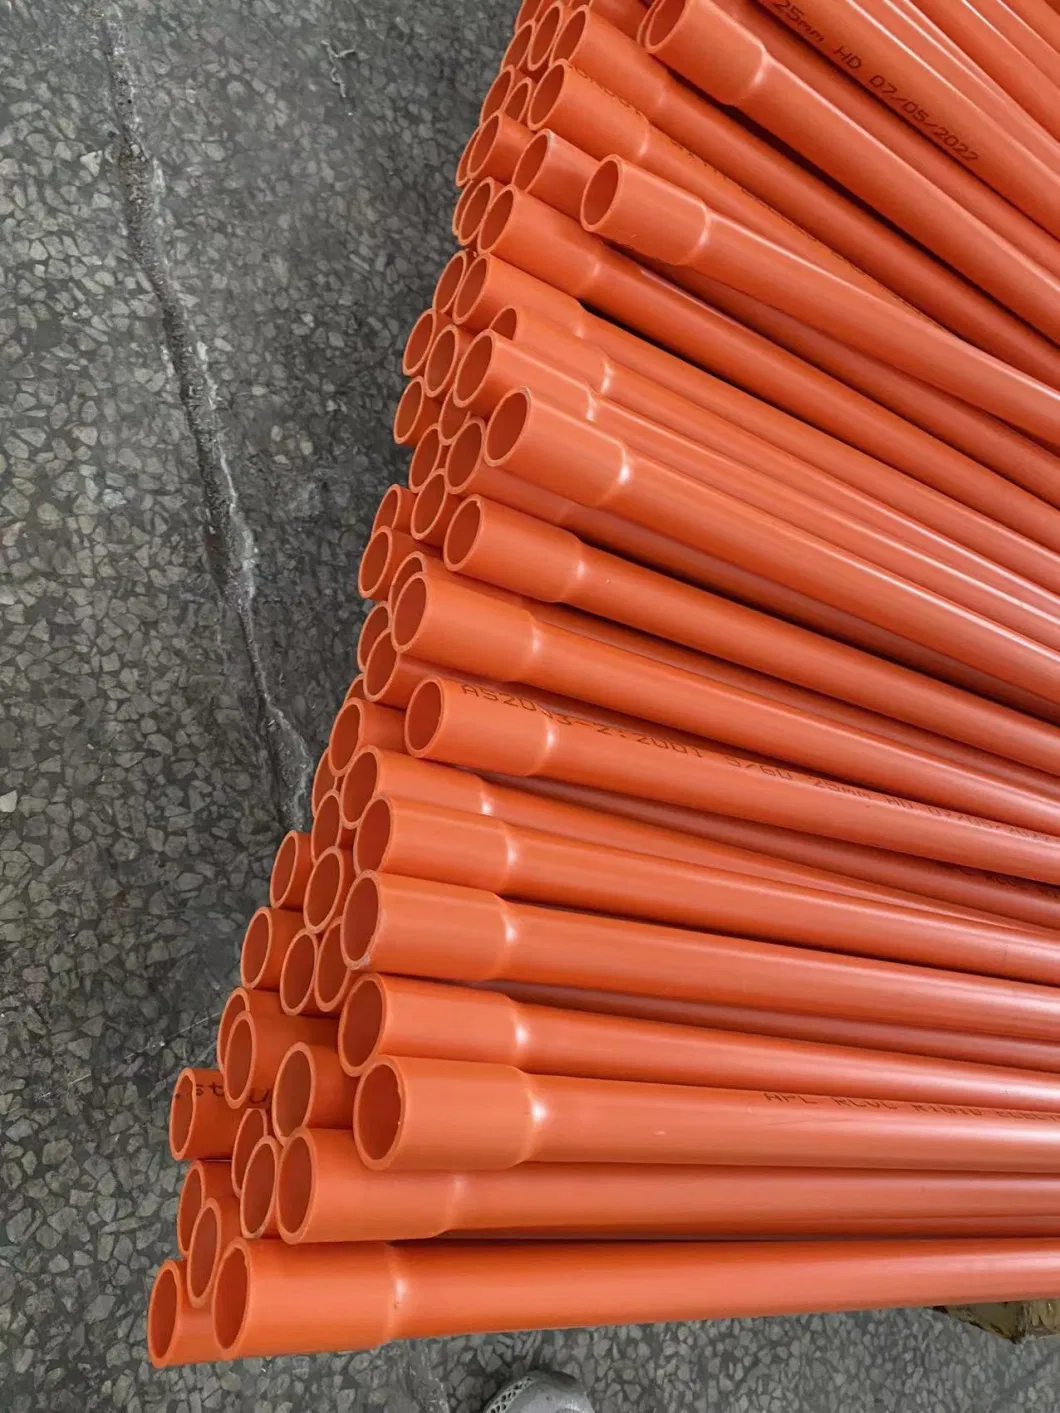 PVC Conduit Pipe and Fitting